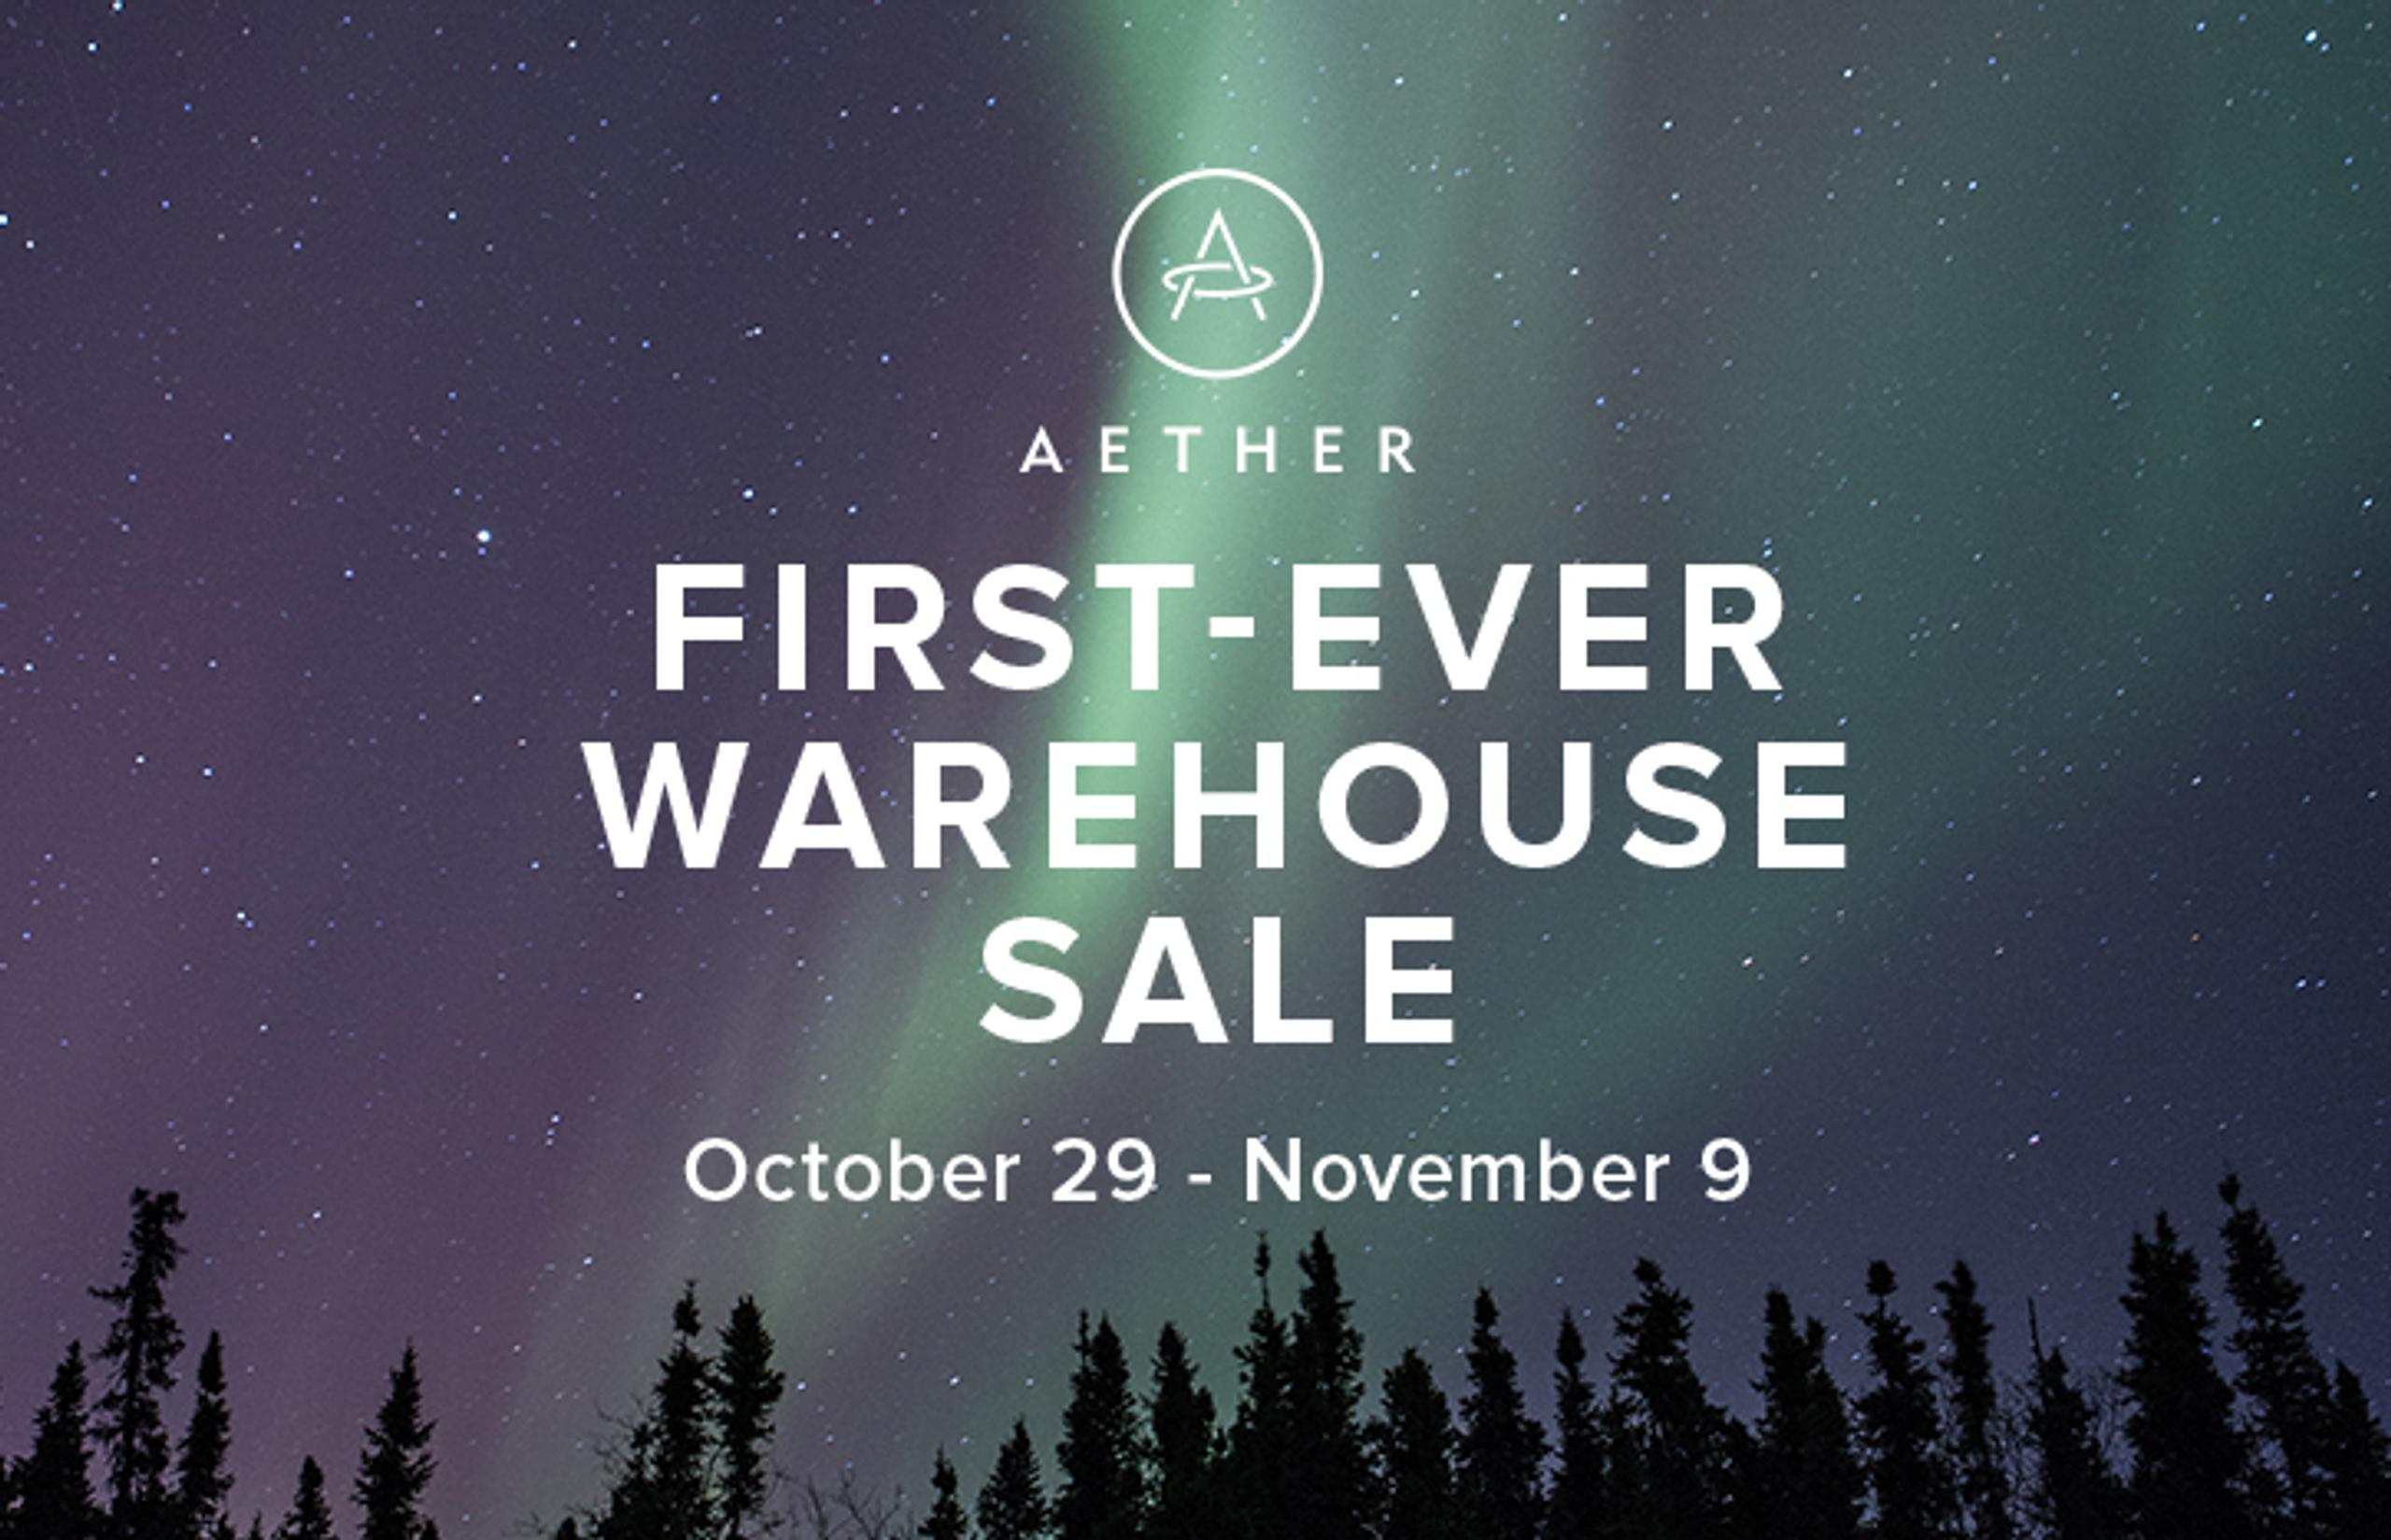 graphic reaading "first-ever warehouse sale"